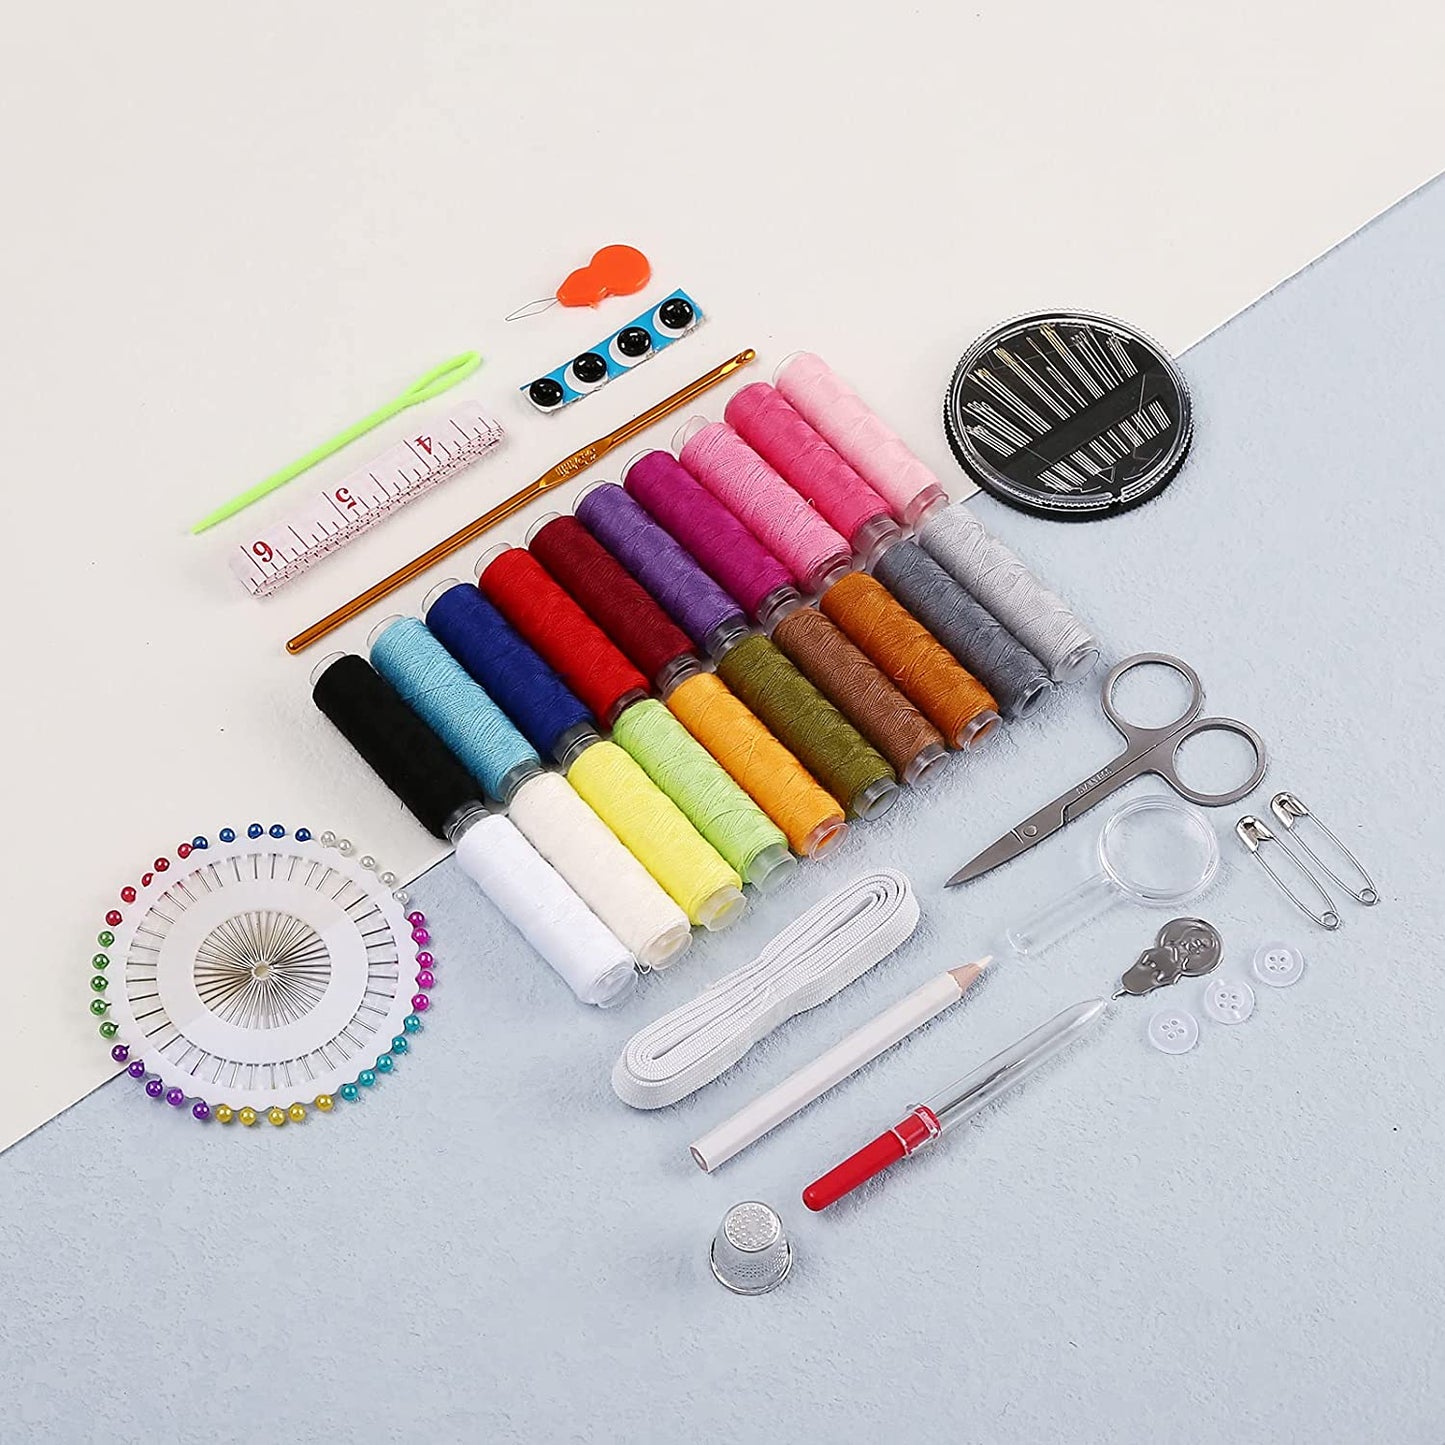 Sewing Kit, Small Sewing Kit 113 Piece Sewing Accessories with Zipper Case, for Home,Travel,Emergency,Adults and Beginners,With Mending,Scissors,Needles and Thread Kits Tape Measure Etc